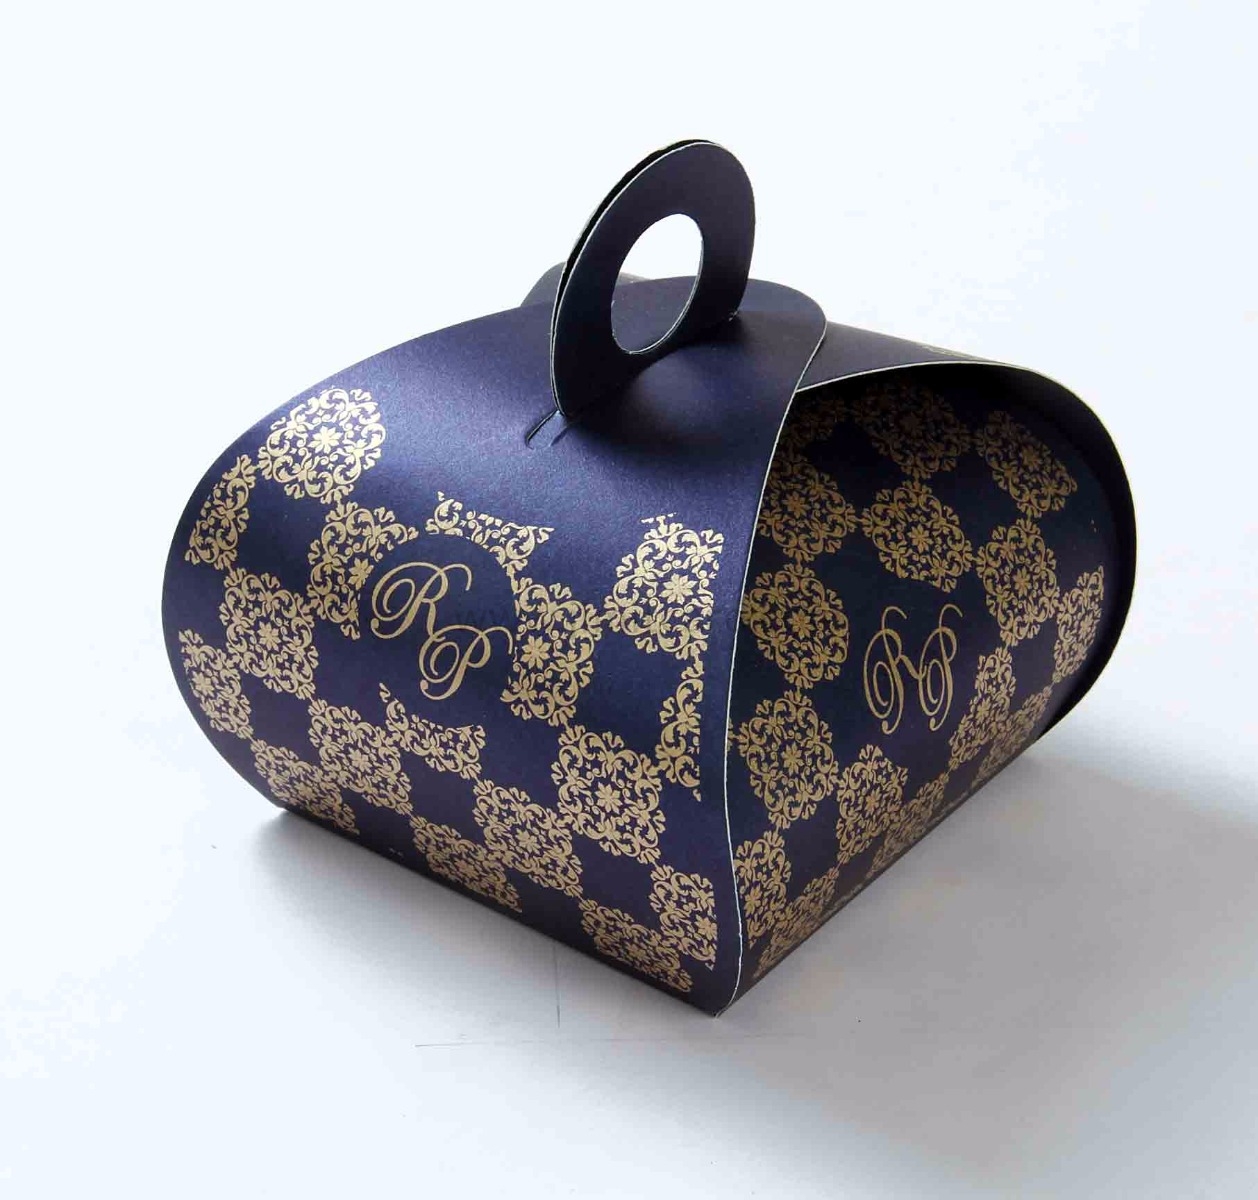 Roll top party Favor Box in Royal Blue Color with a holder